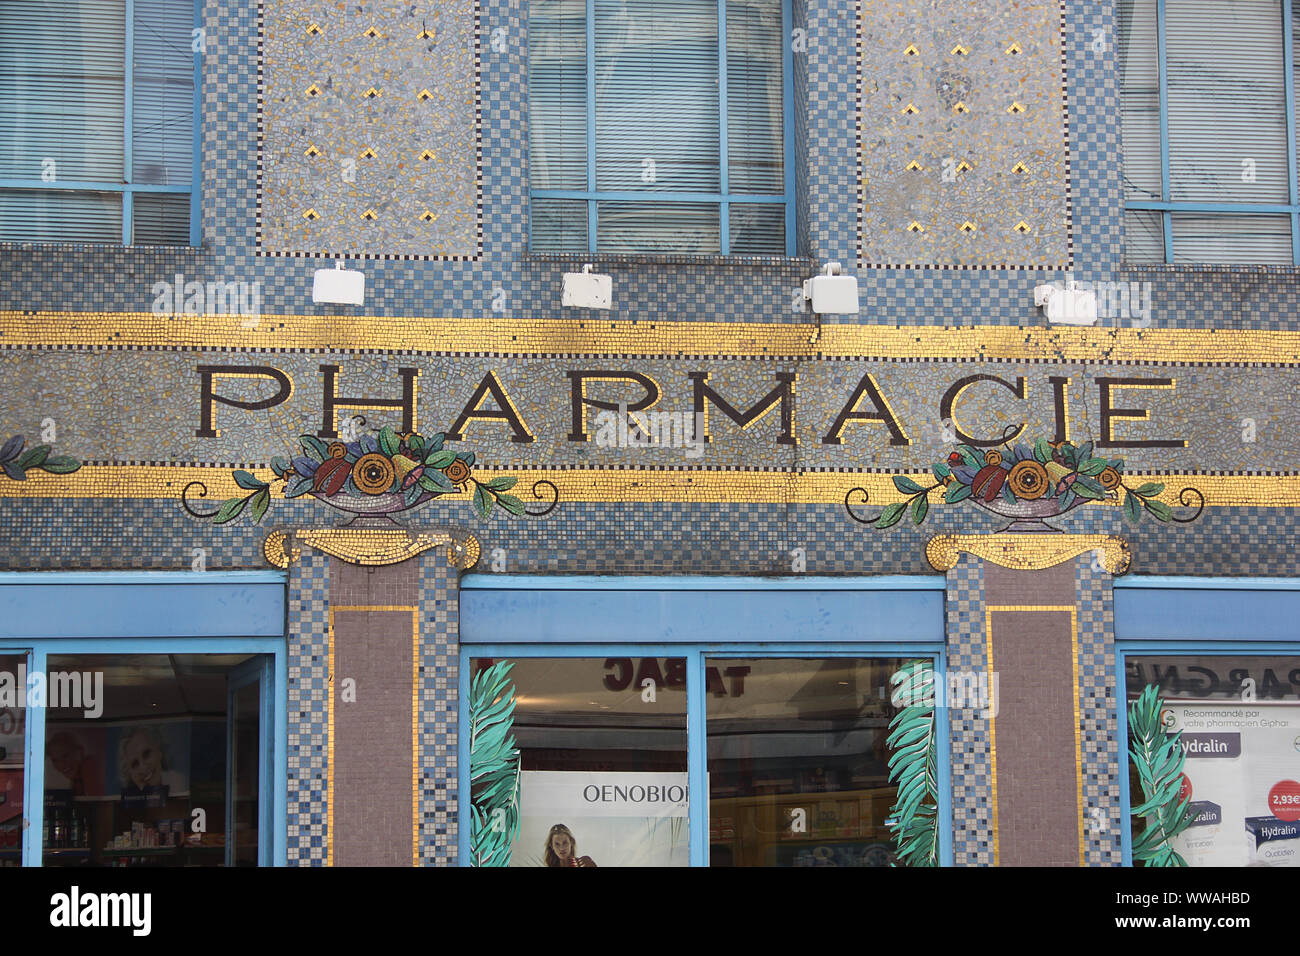 The shop front of a pharmacy in Nancy, north-eastern France. The mosaic is by the Art Deco ceramicist Rene Ebel. Stock Photo